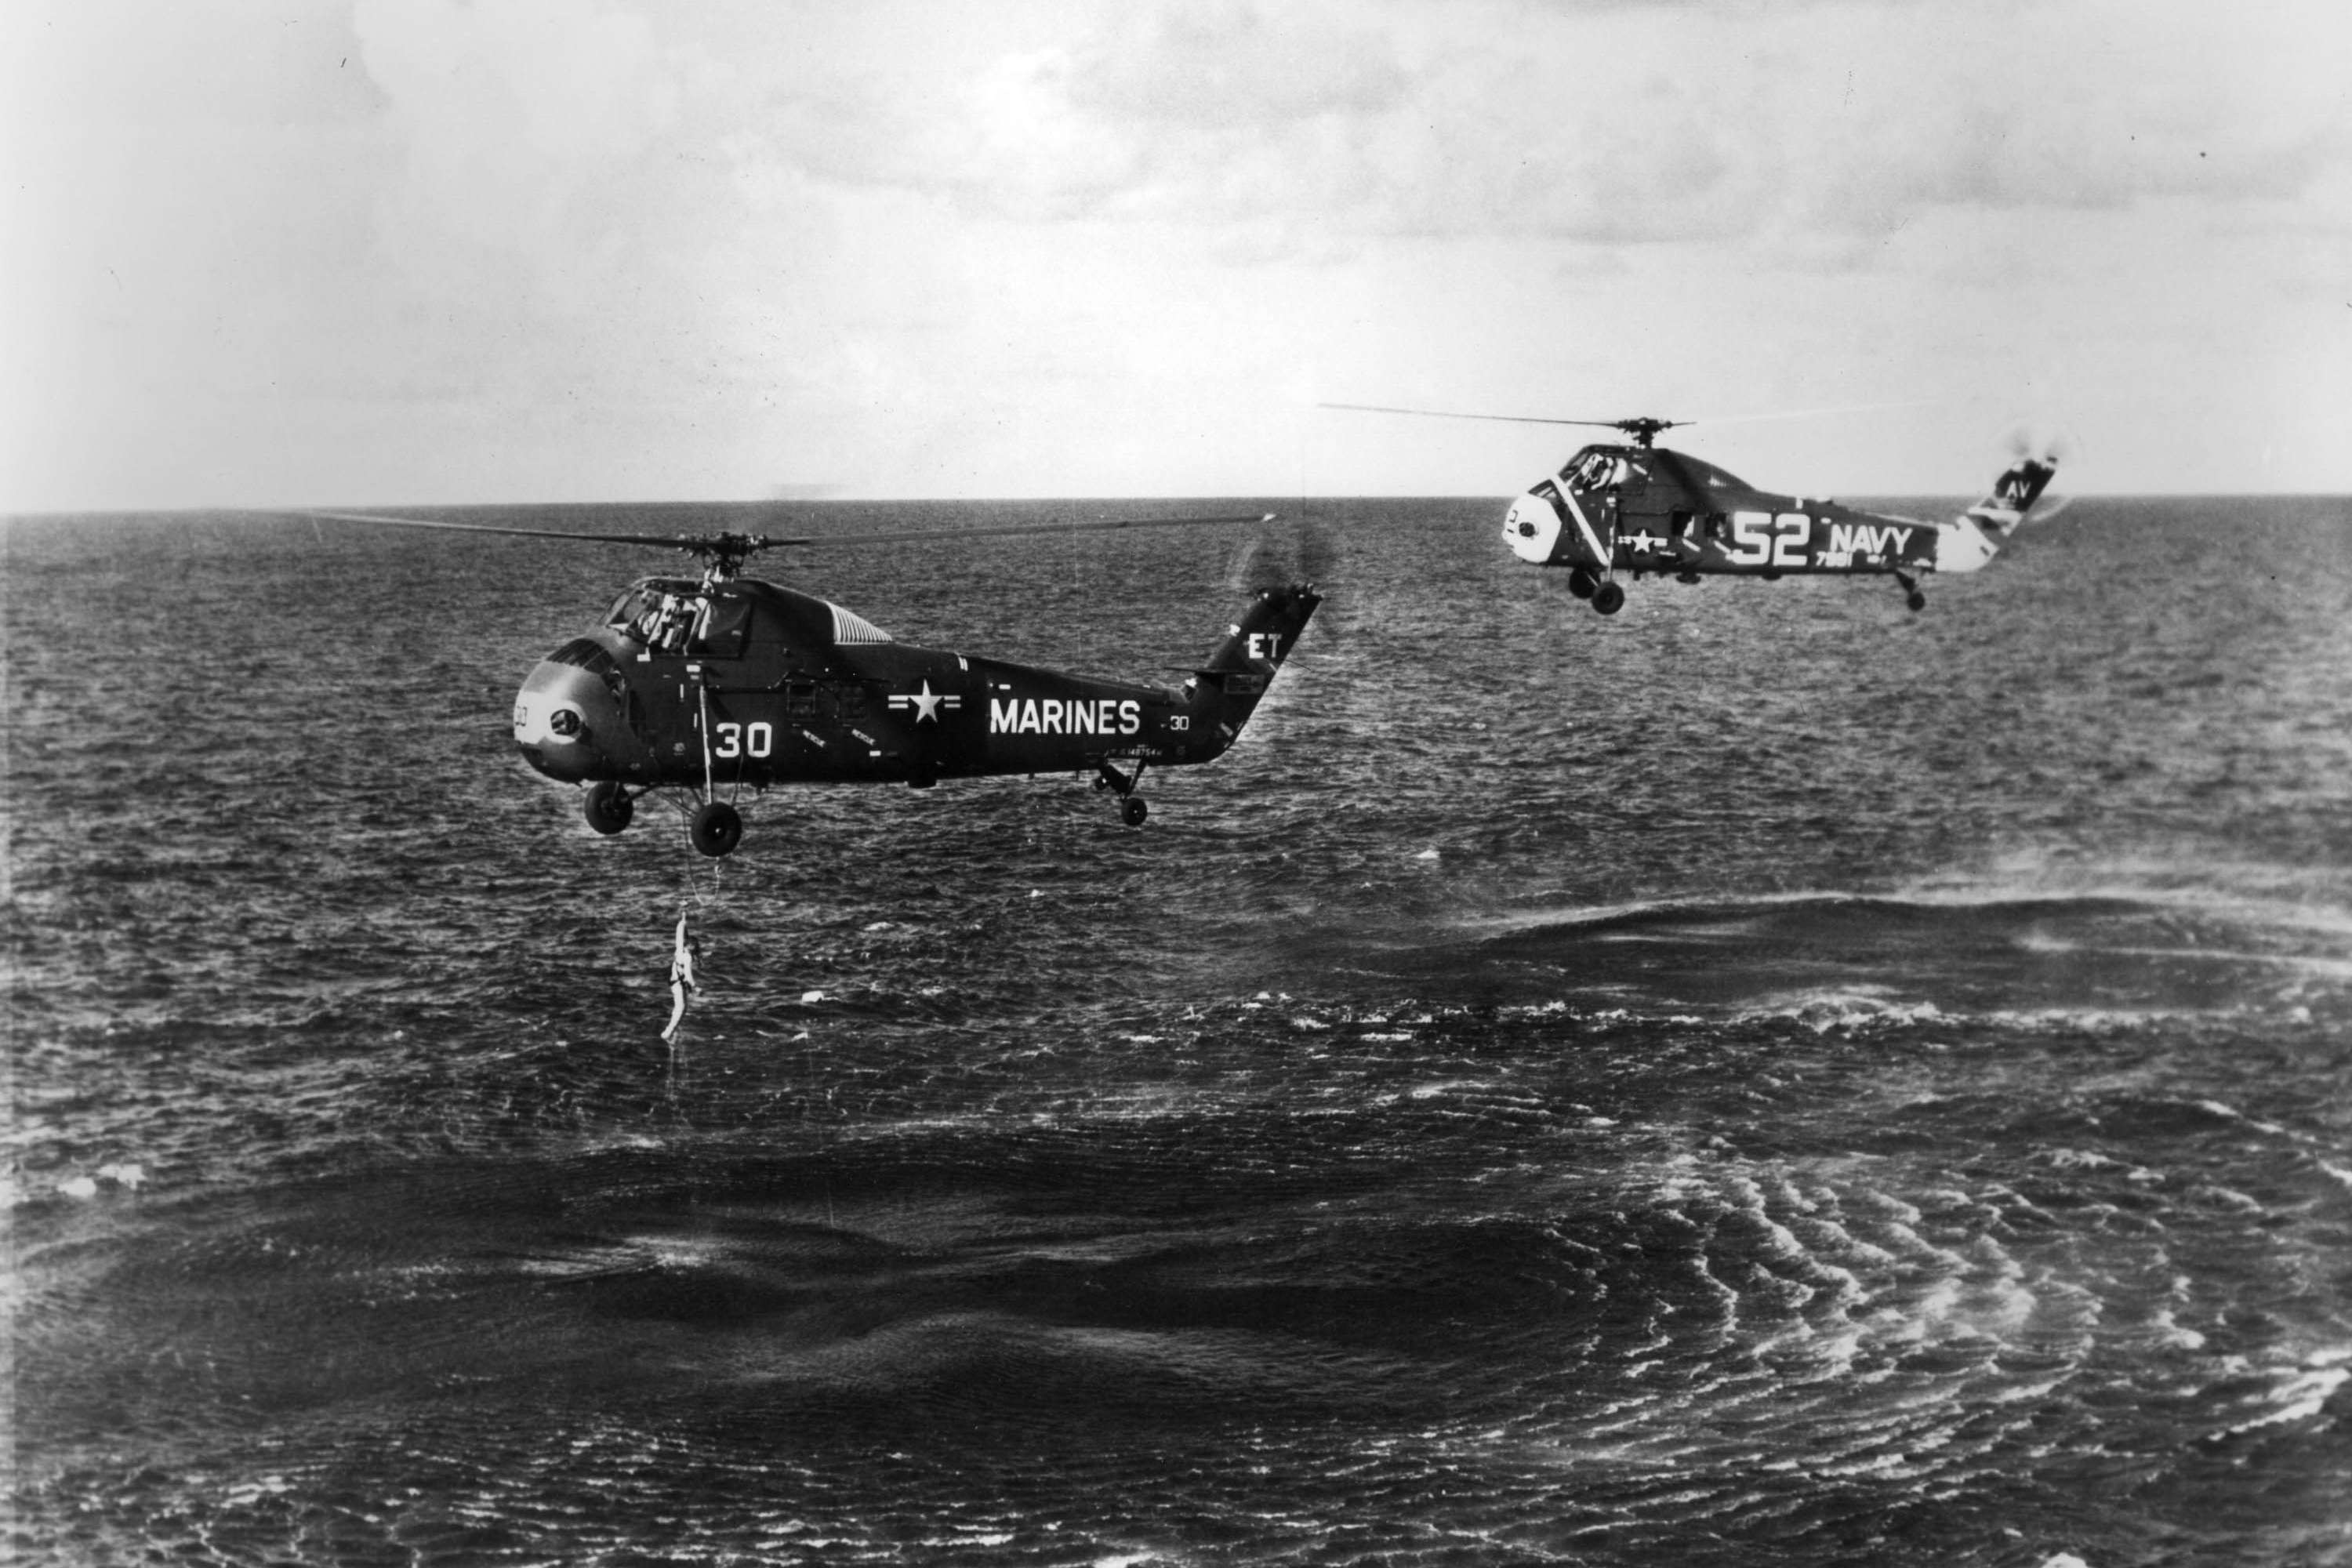 July 21, 1961, Worldwide Mercury Astronaut Virgil 'Gus' Grissom Is Pulled From The Ocean. His Spce Capsule 'Liberty Bell 7' Sank After He Opened The Side Hatch. (NASA/Getty Images)